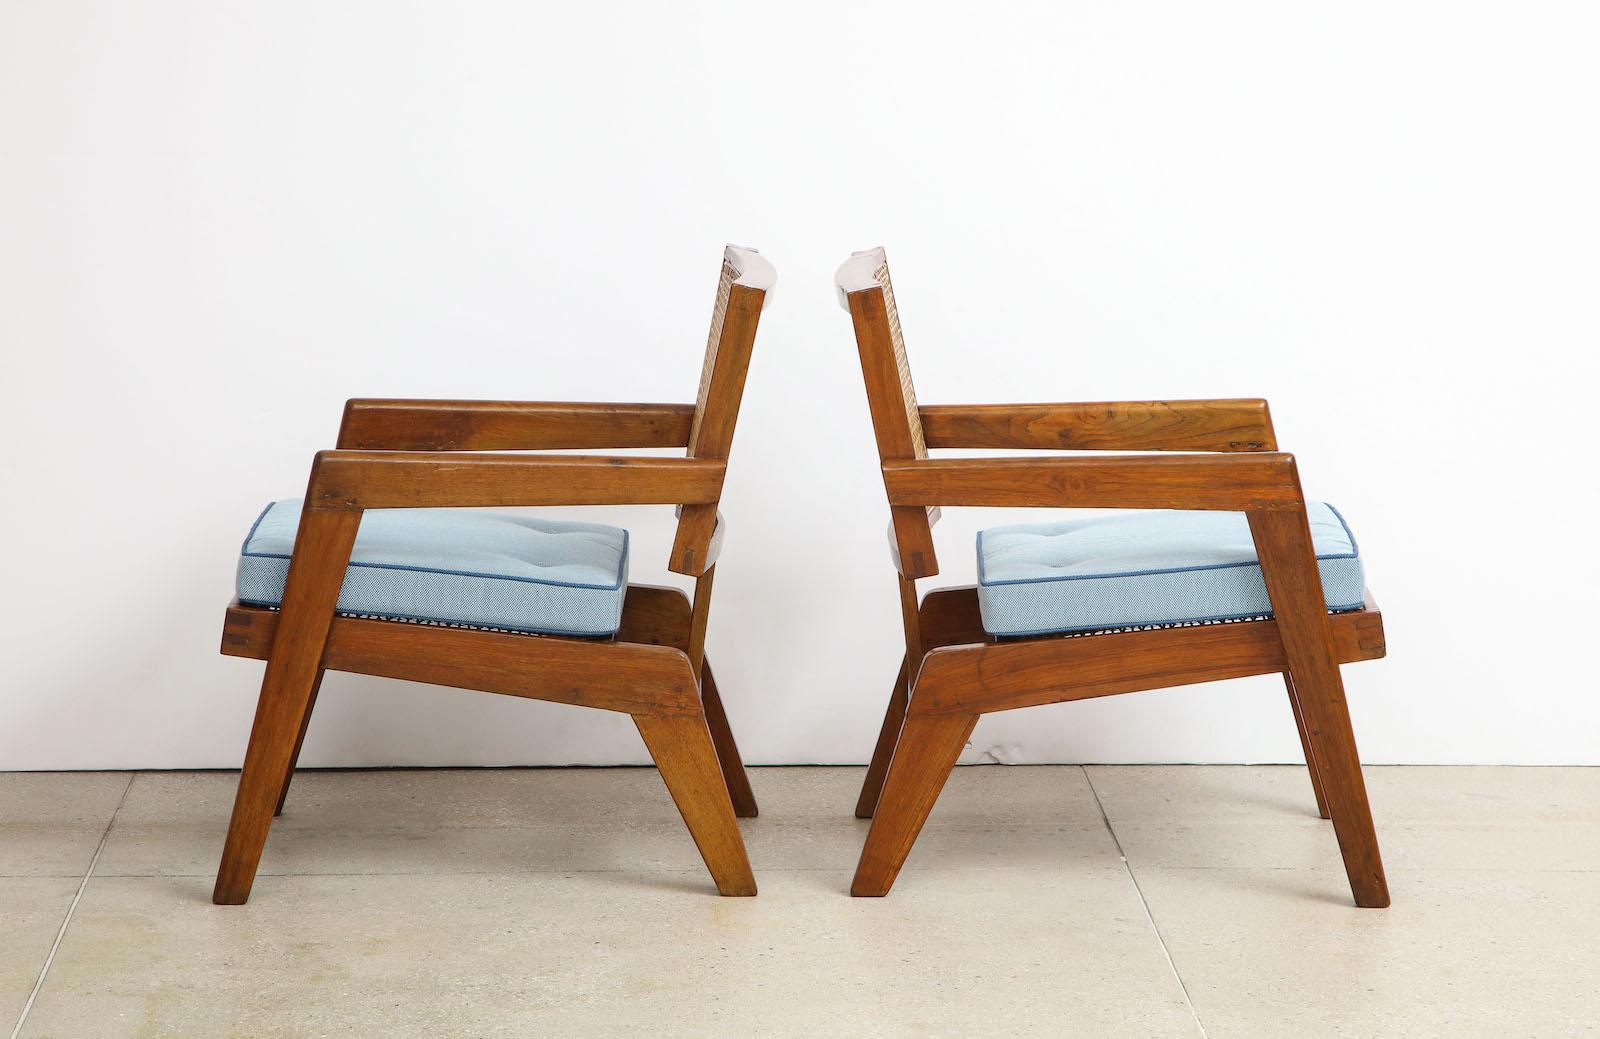 Rare pair of armchairs by Pierre Jeanneret. Open armchair model. Teak, rattan and upholstered cushion. Originally design for the University of Punjab, Chandigarh, India. Very good vintage condition with newly made seat cushions.